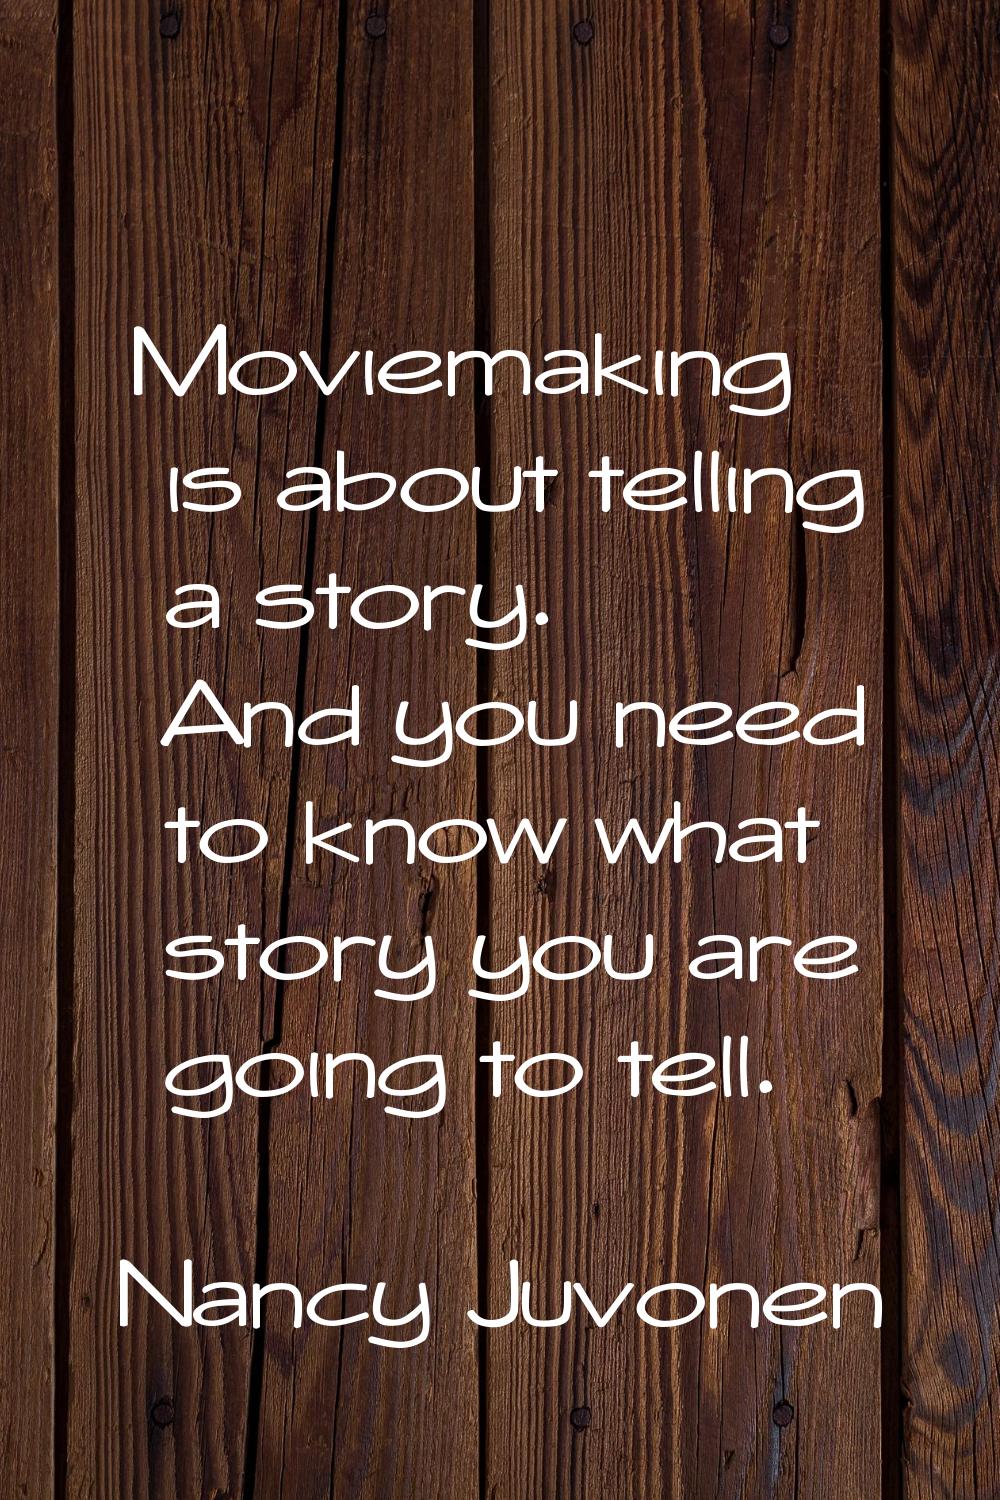 Moviemaking is about telling a story. And you need to know what story you are going to tell.